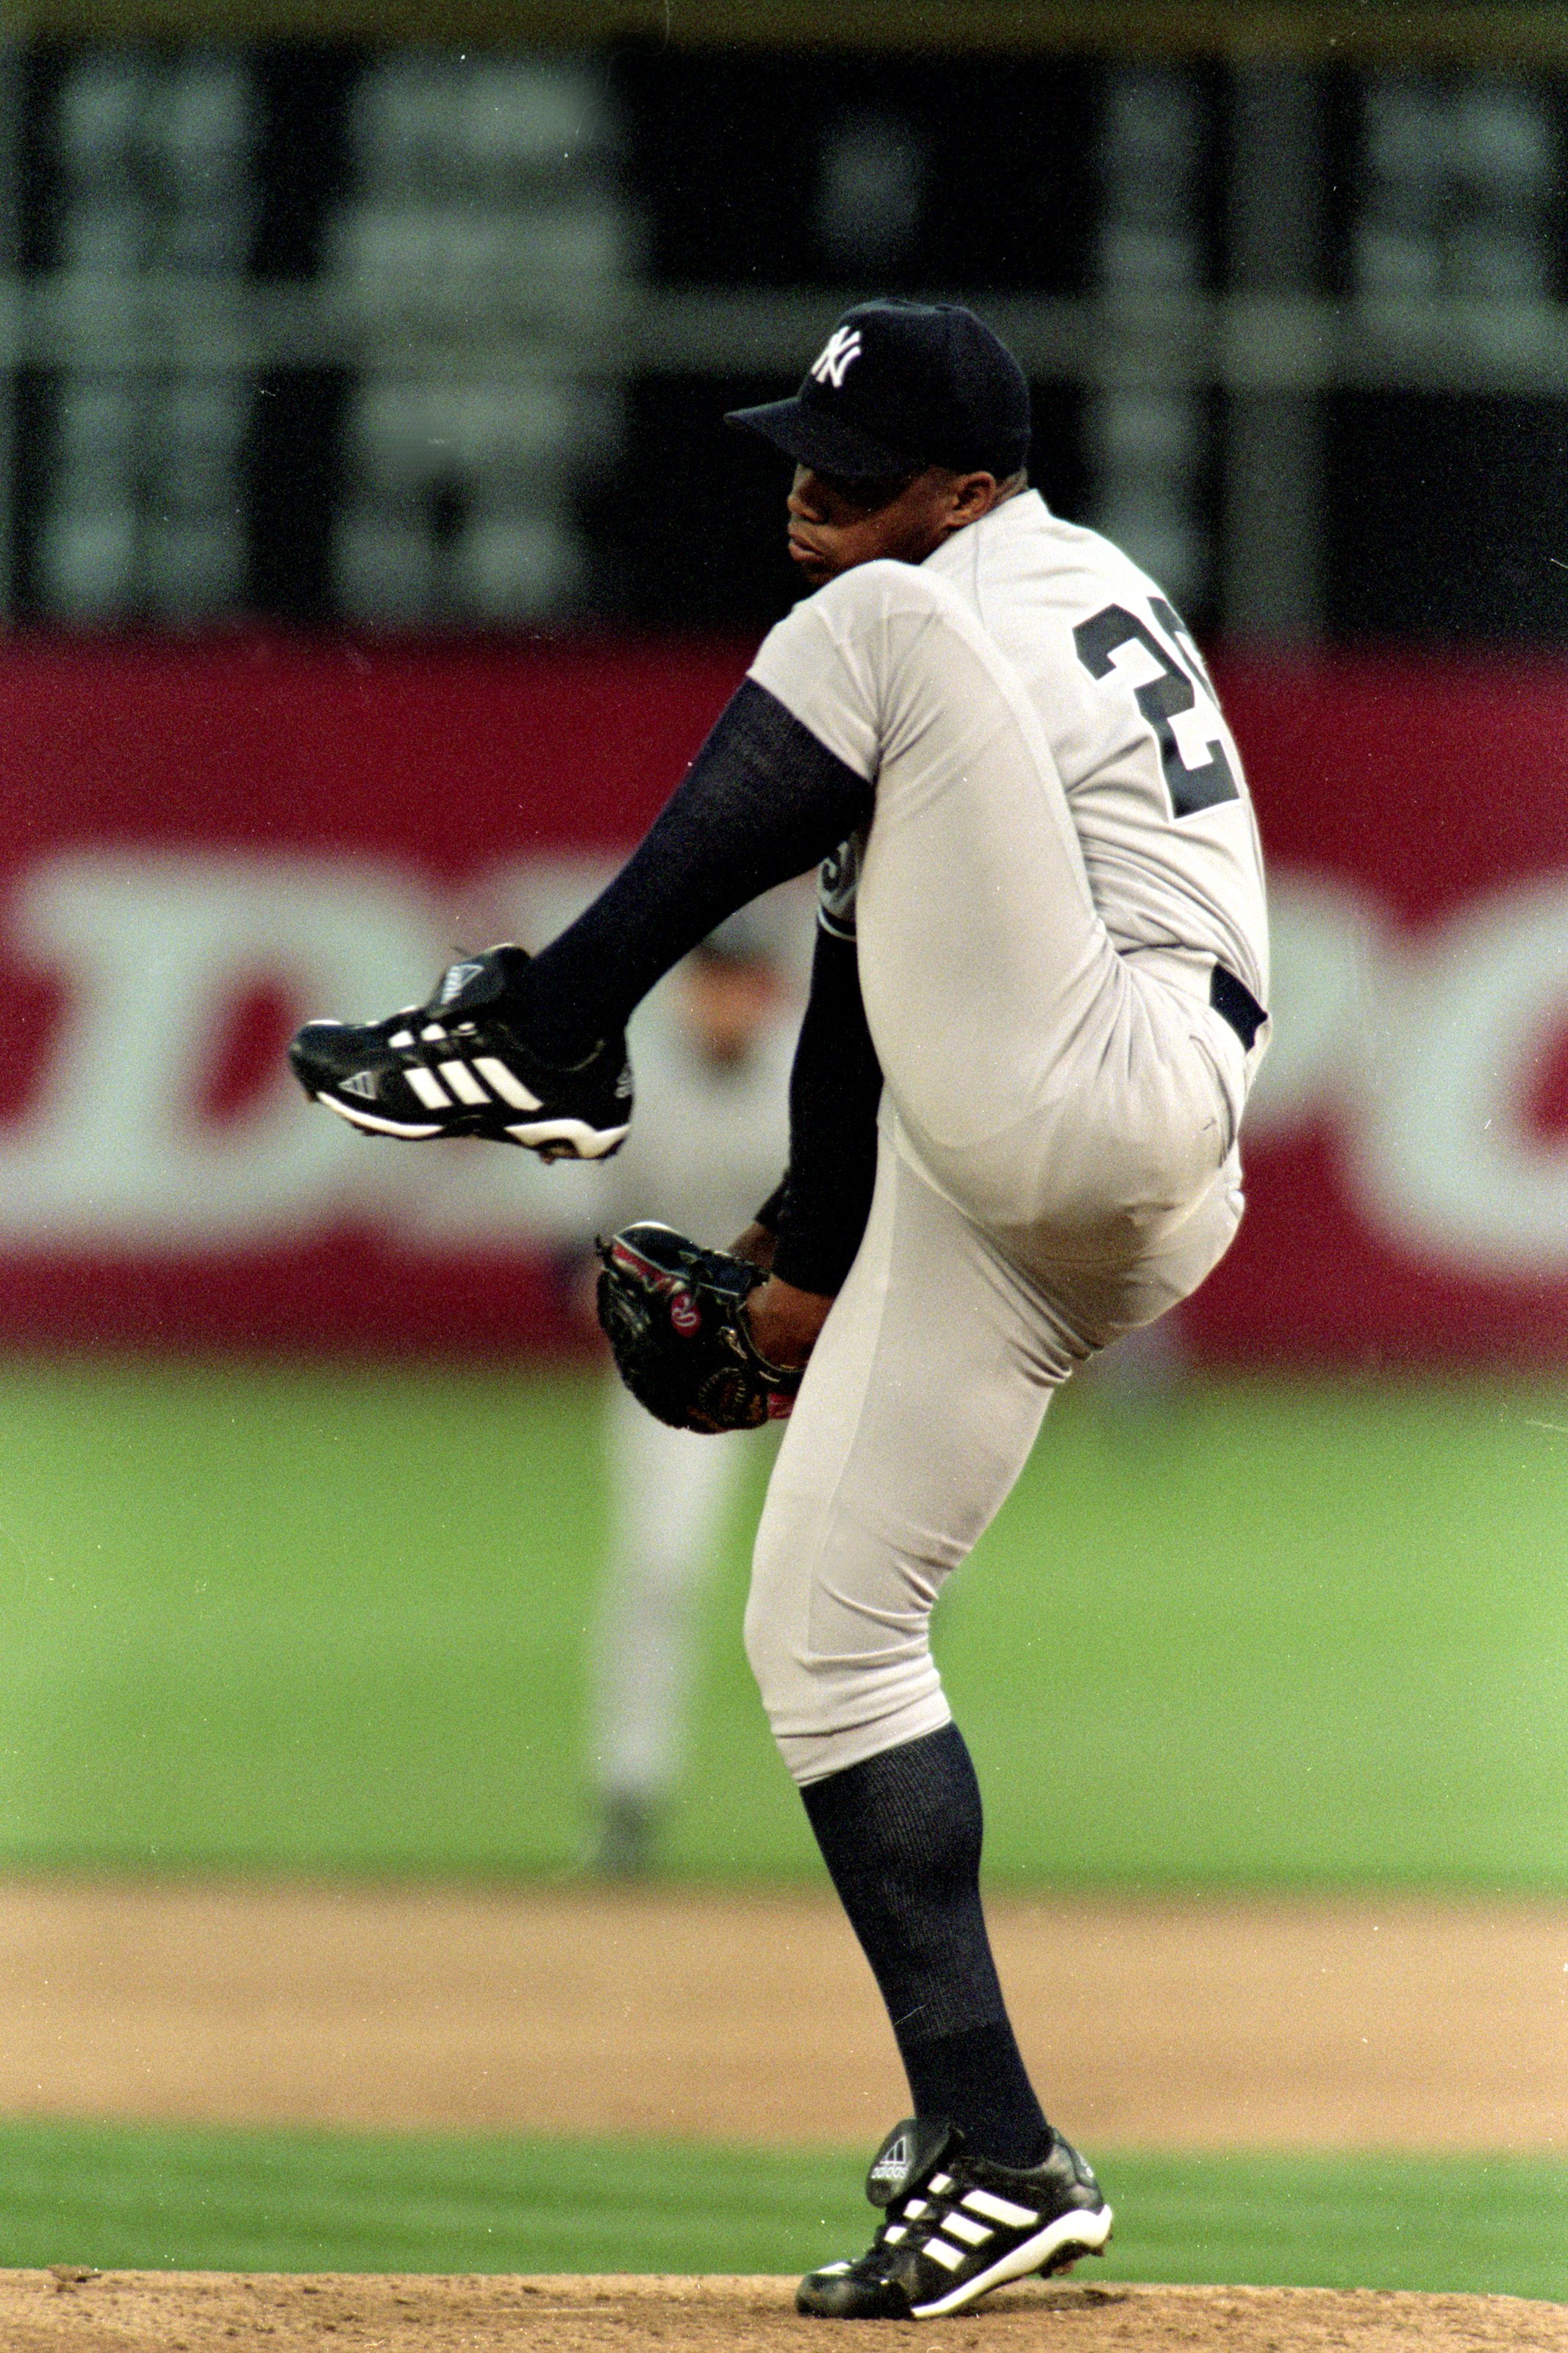 6 Apr 1999: Orlando Hernandez of the New York Yankees winds up to pitch during a game against the Oakland Athletics at the Oakland, Coliseum in Oakland, California.